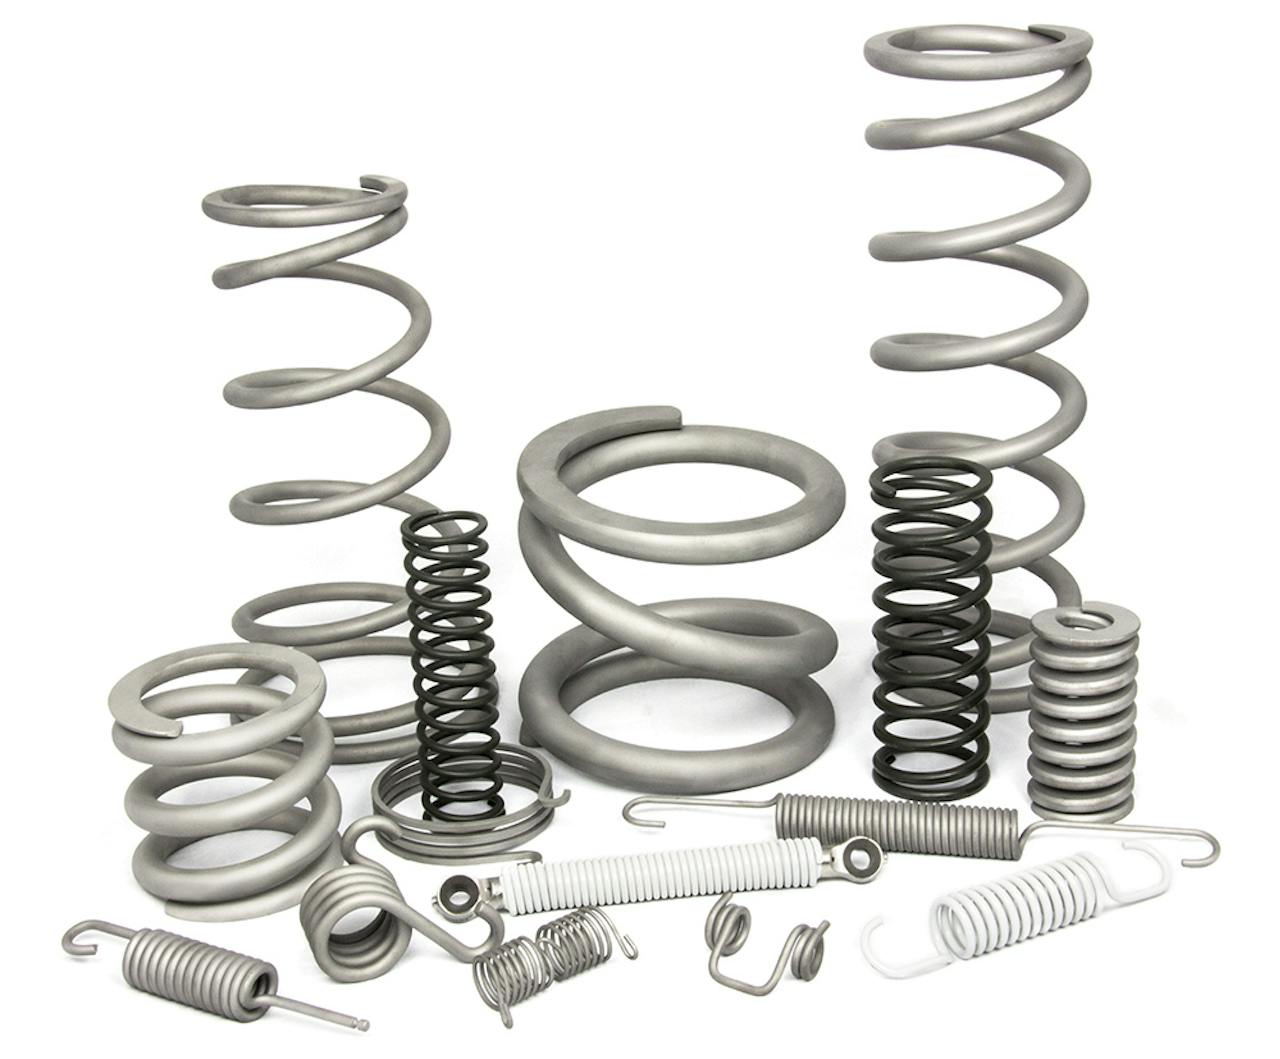 Custom coiled springs - Compression, extension & torsion